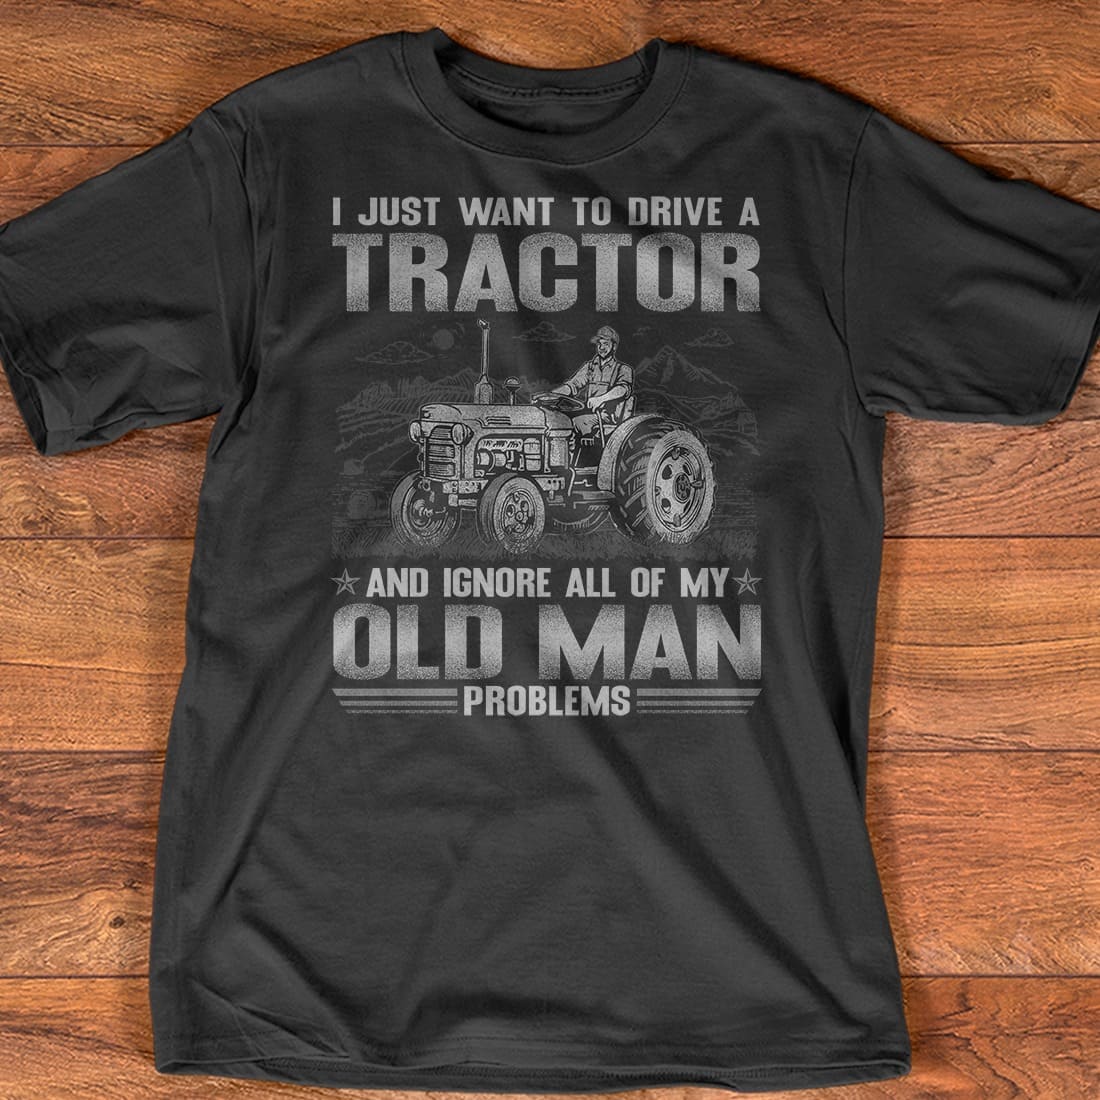 I just want to drive a tractor and ignore all of my old man problems ...